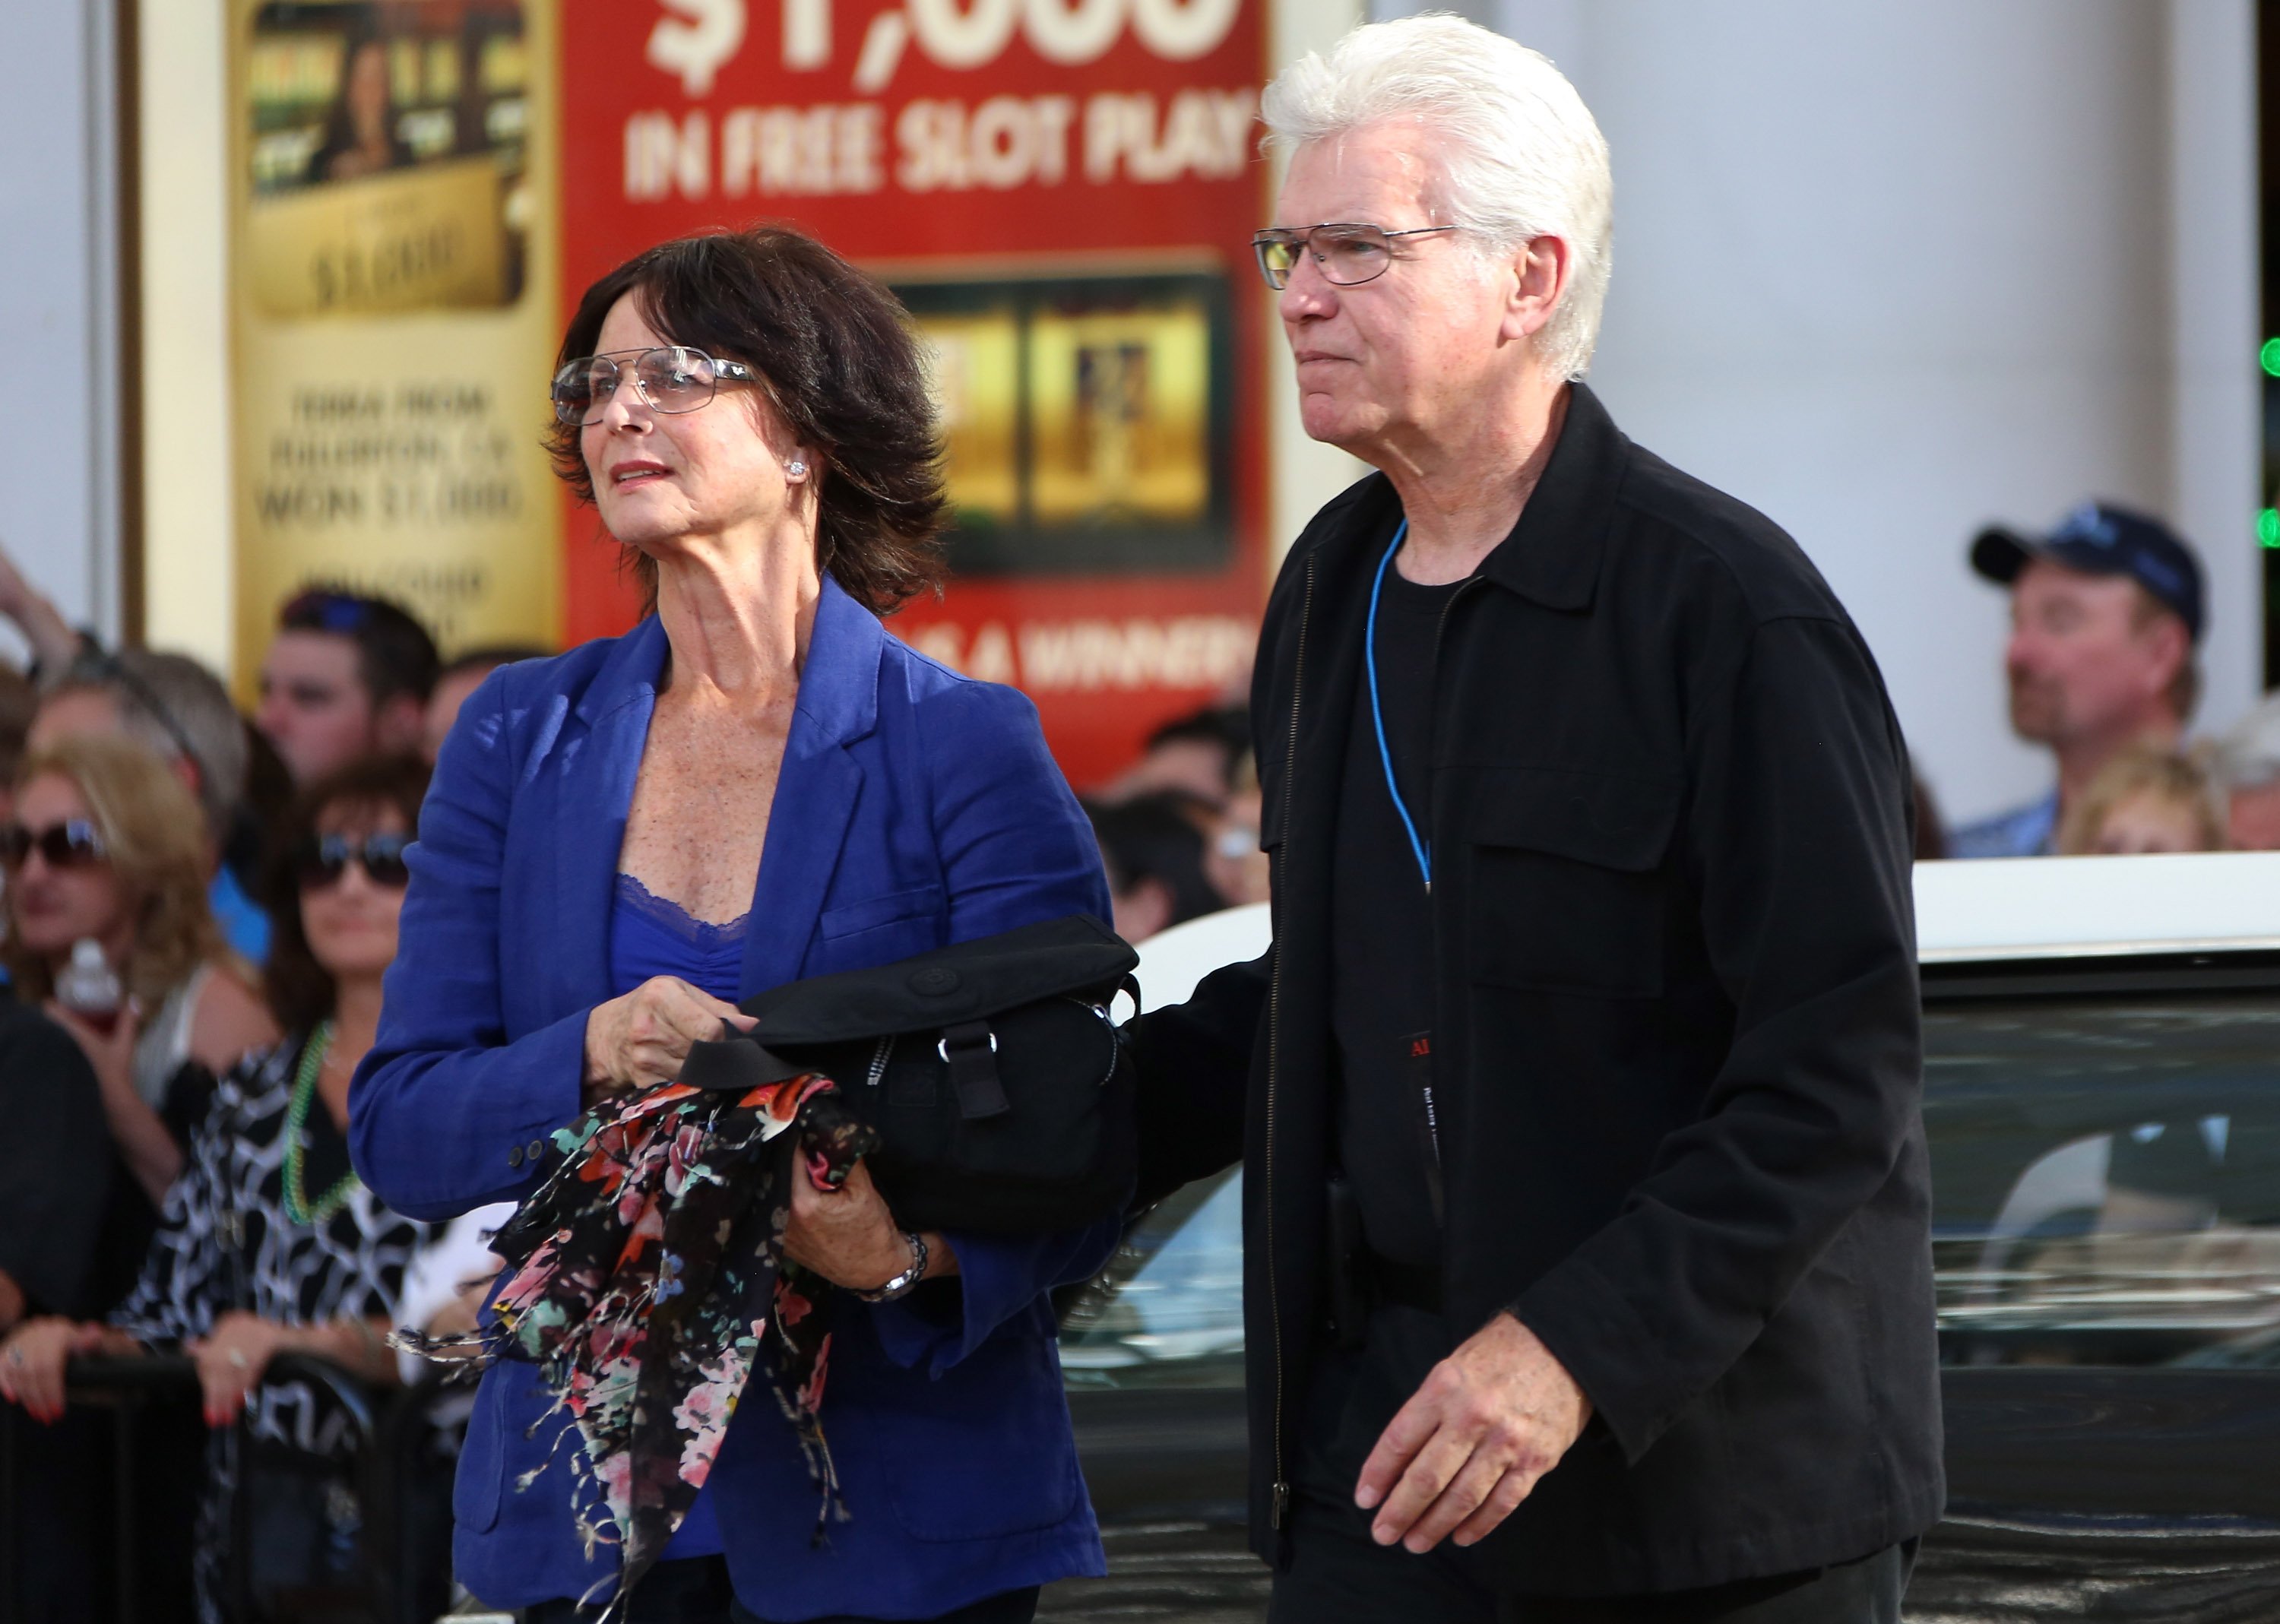 Kent McCord and wife Cynthia Doty arrive at the opening ceremony of Las Vegas Car Stars at the Fremont Street Experience on May 17, 2013 in Las Vegas, Nevada. | Source: Getty Images